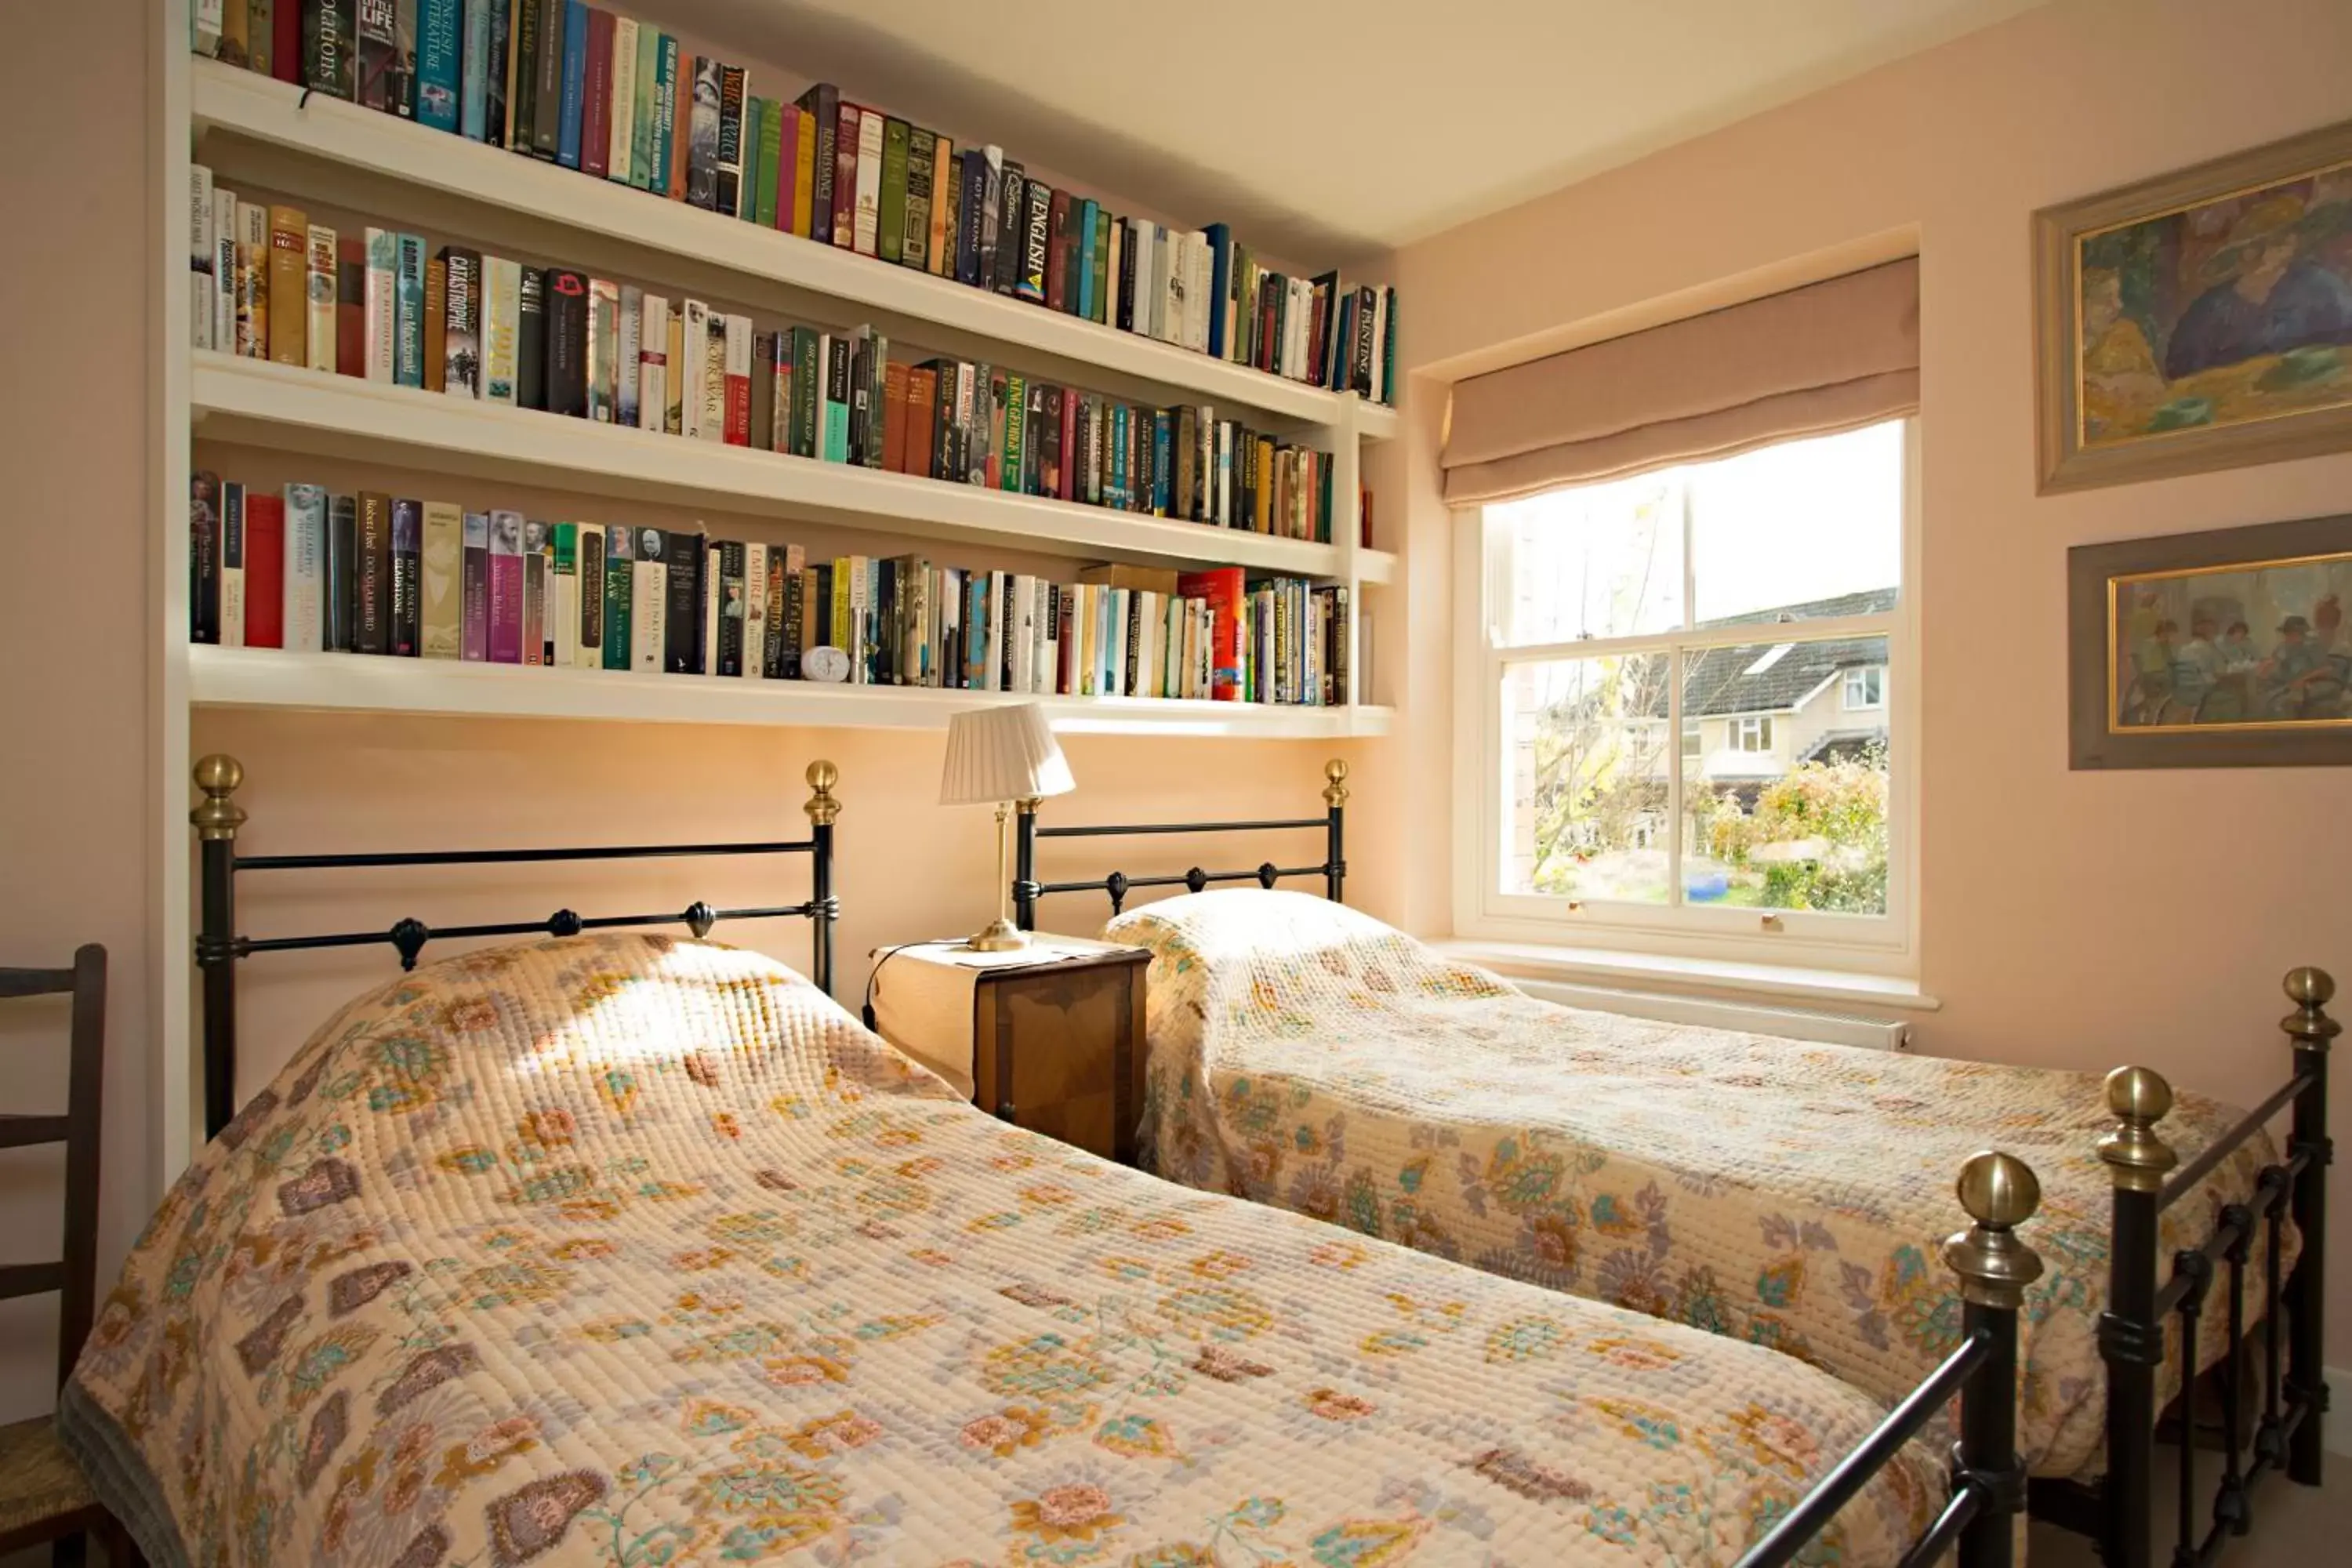 Bedroom, Library in Turks Hall